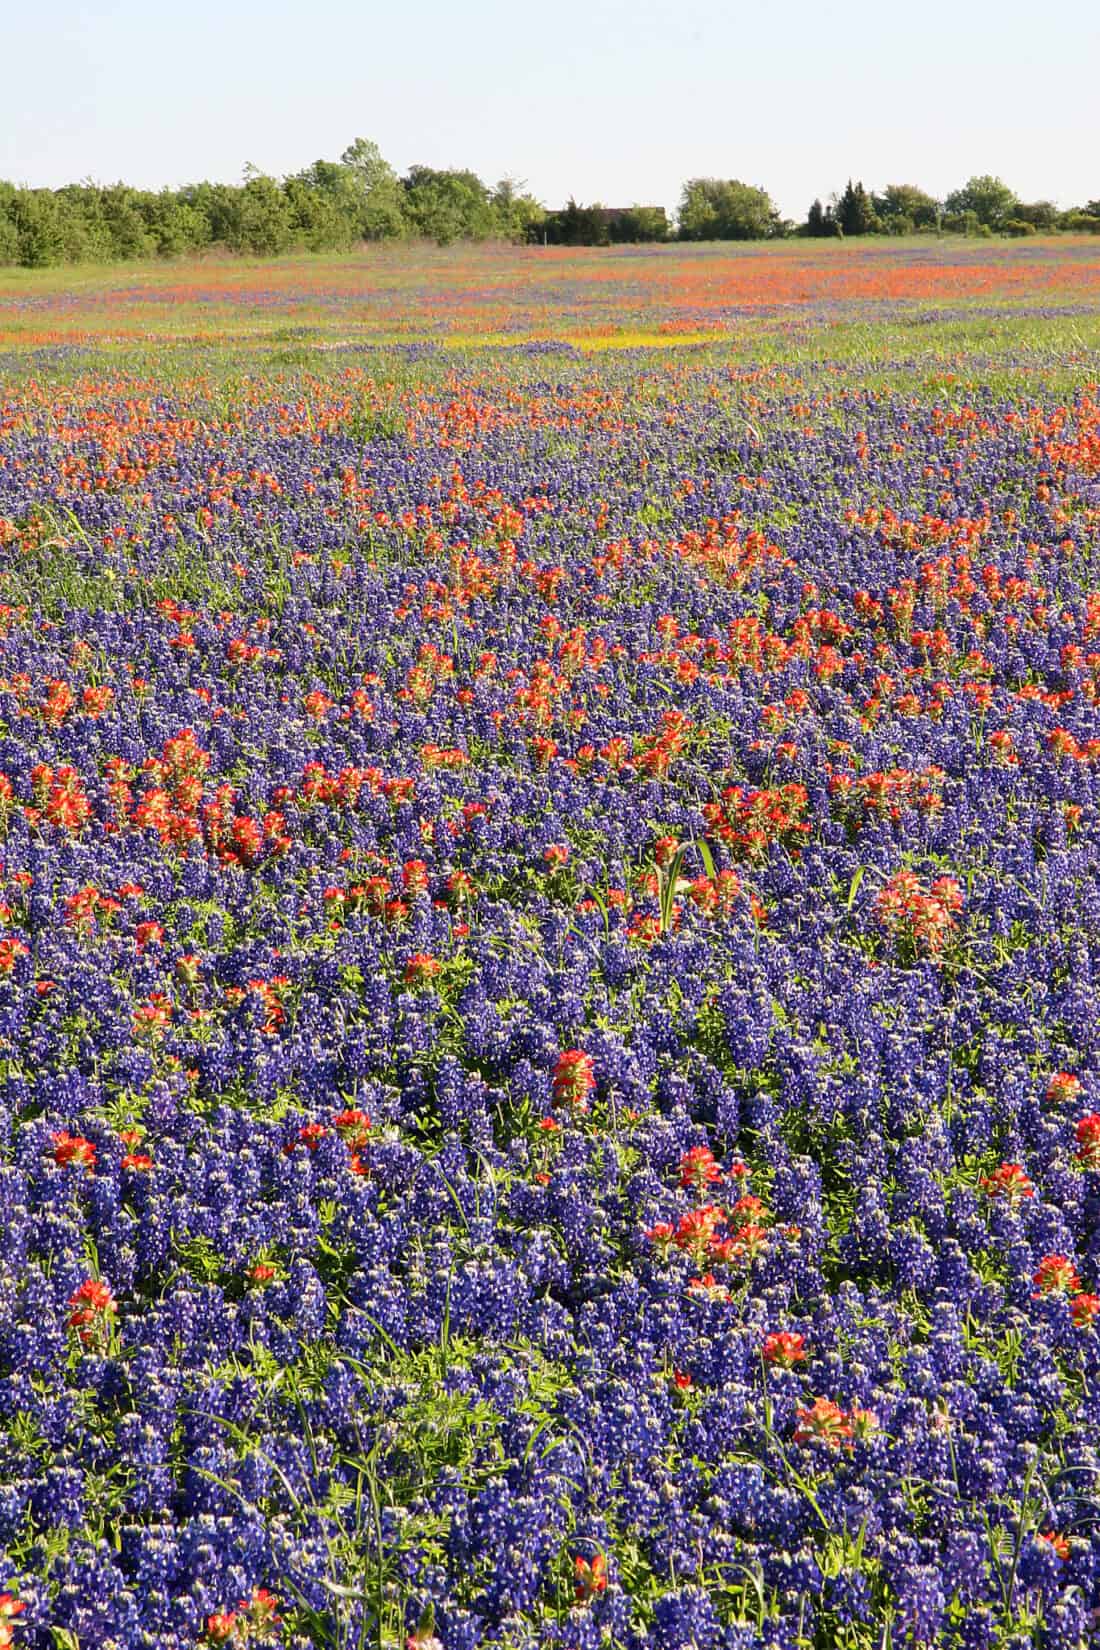  field in Texas full of blue bells and other native wildflowers